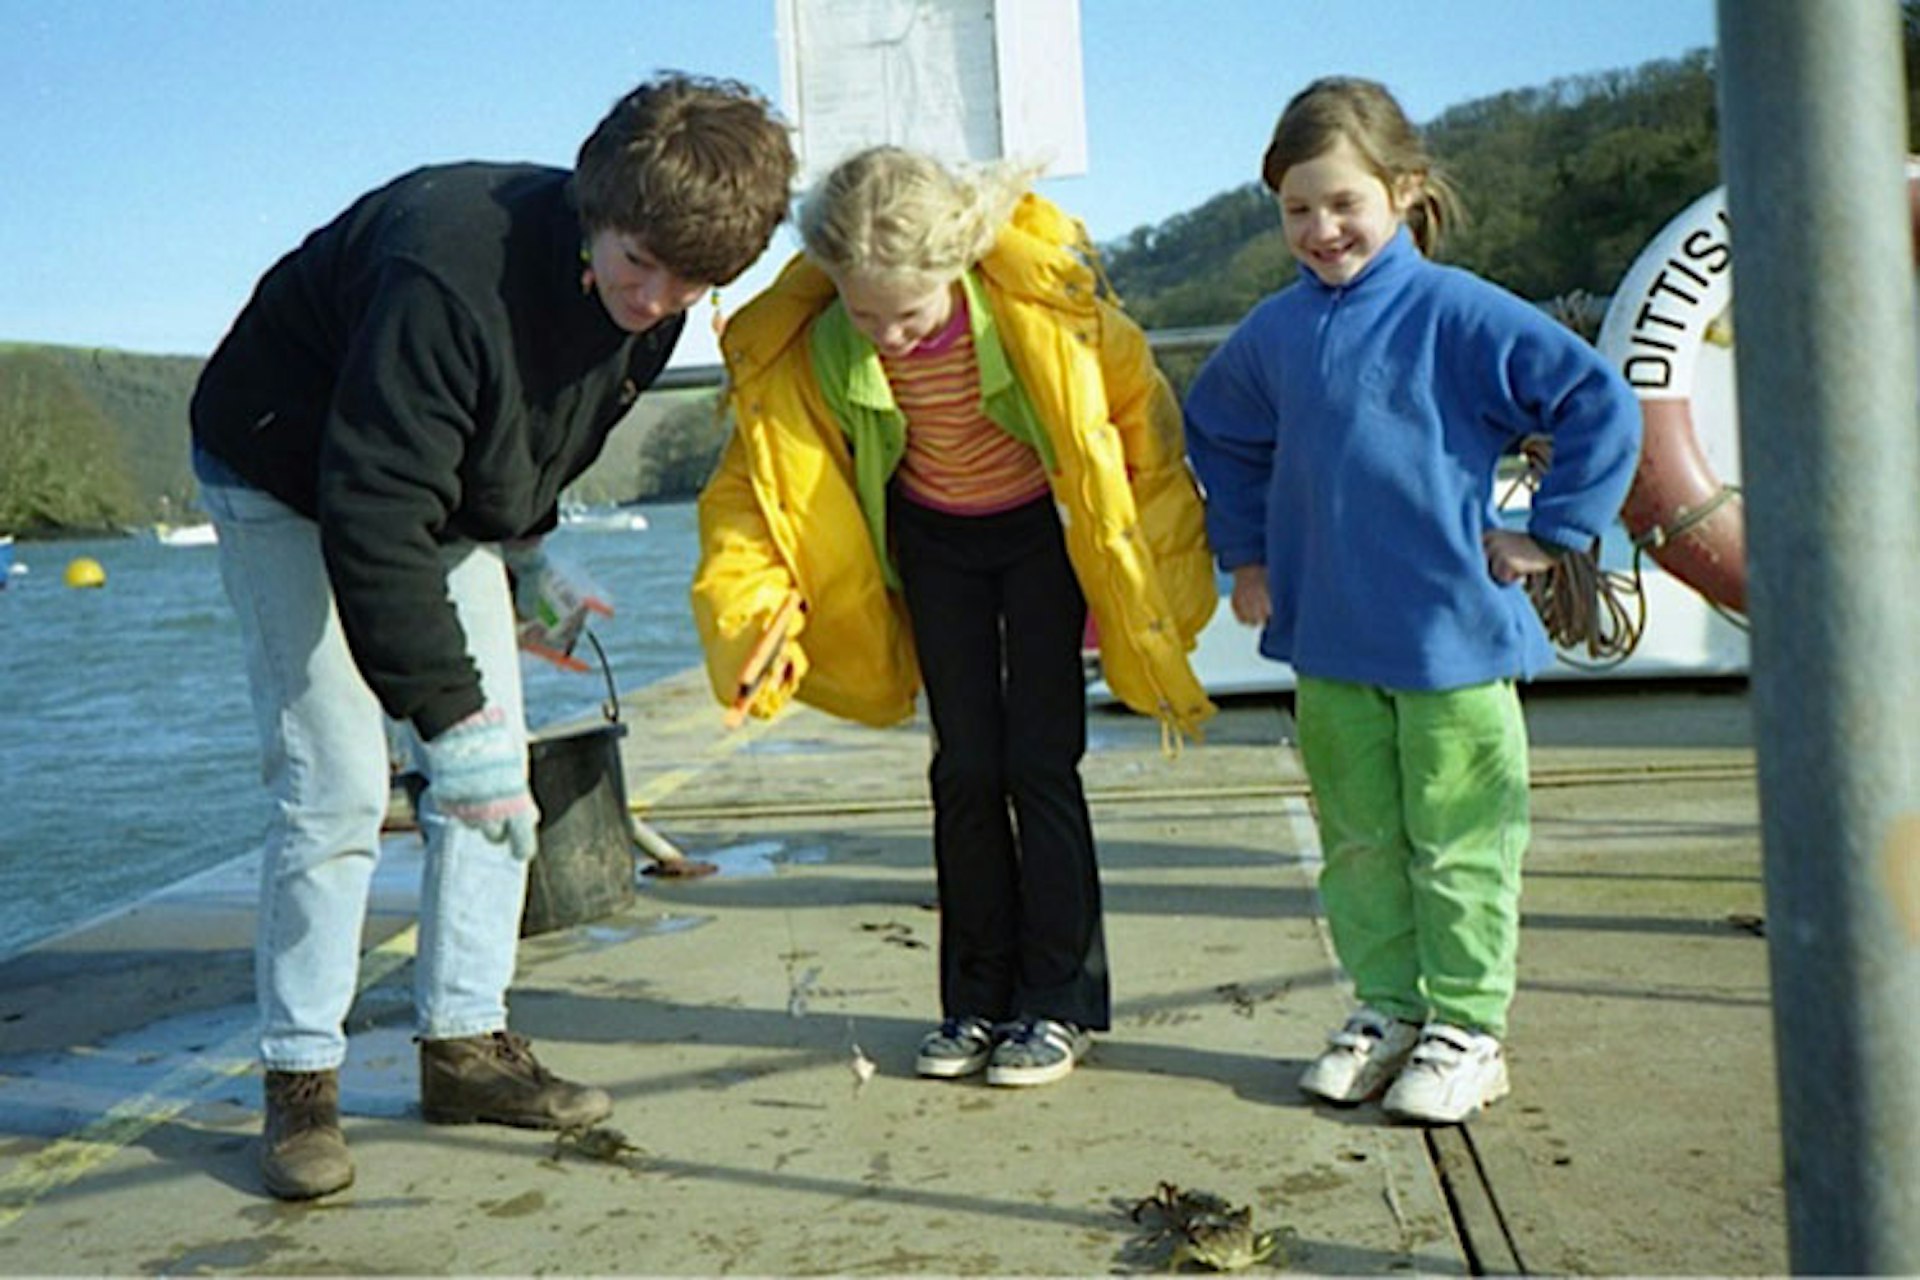 Ellie Simpson (centre) inspects the day’s catch on a jetty in Devon. Image by Ellie Simpson / Lonely Planet.